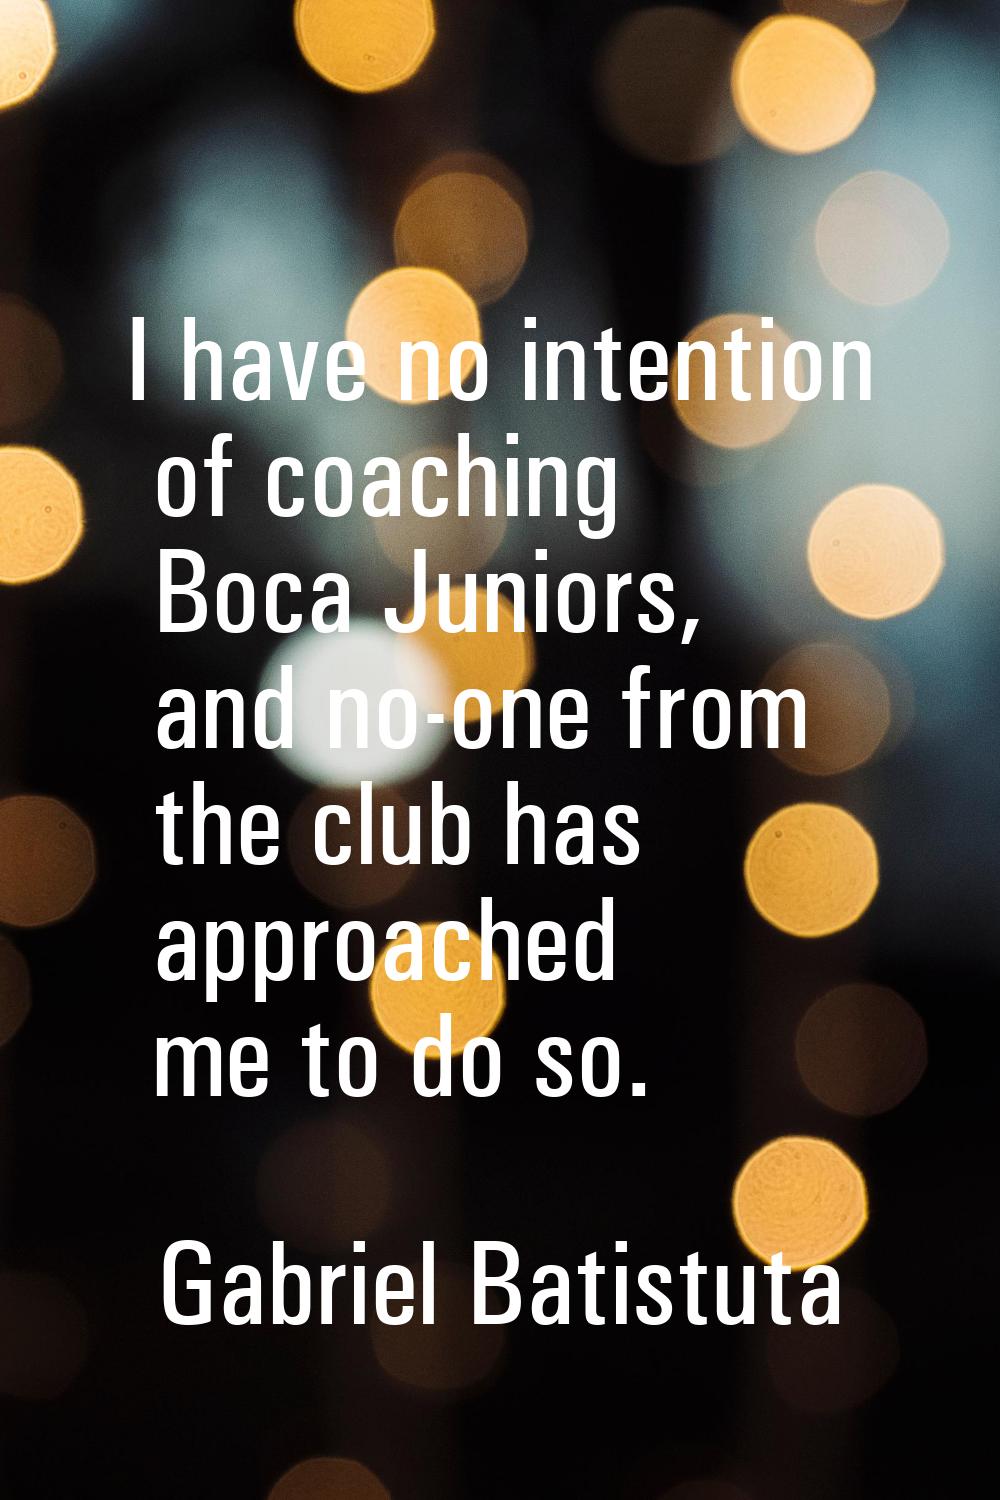 I have no intention of coaching Boca Juniors, and no-one from the club has approached me to do so.